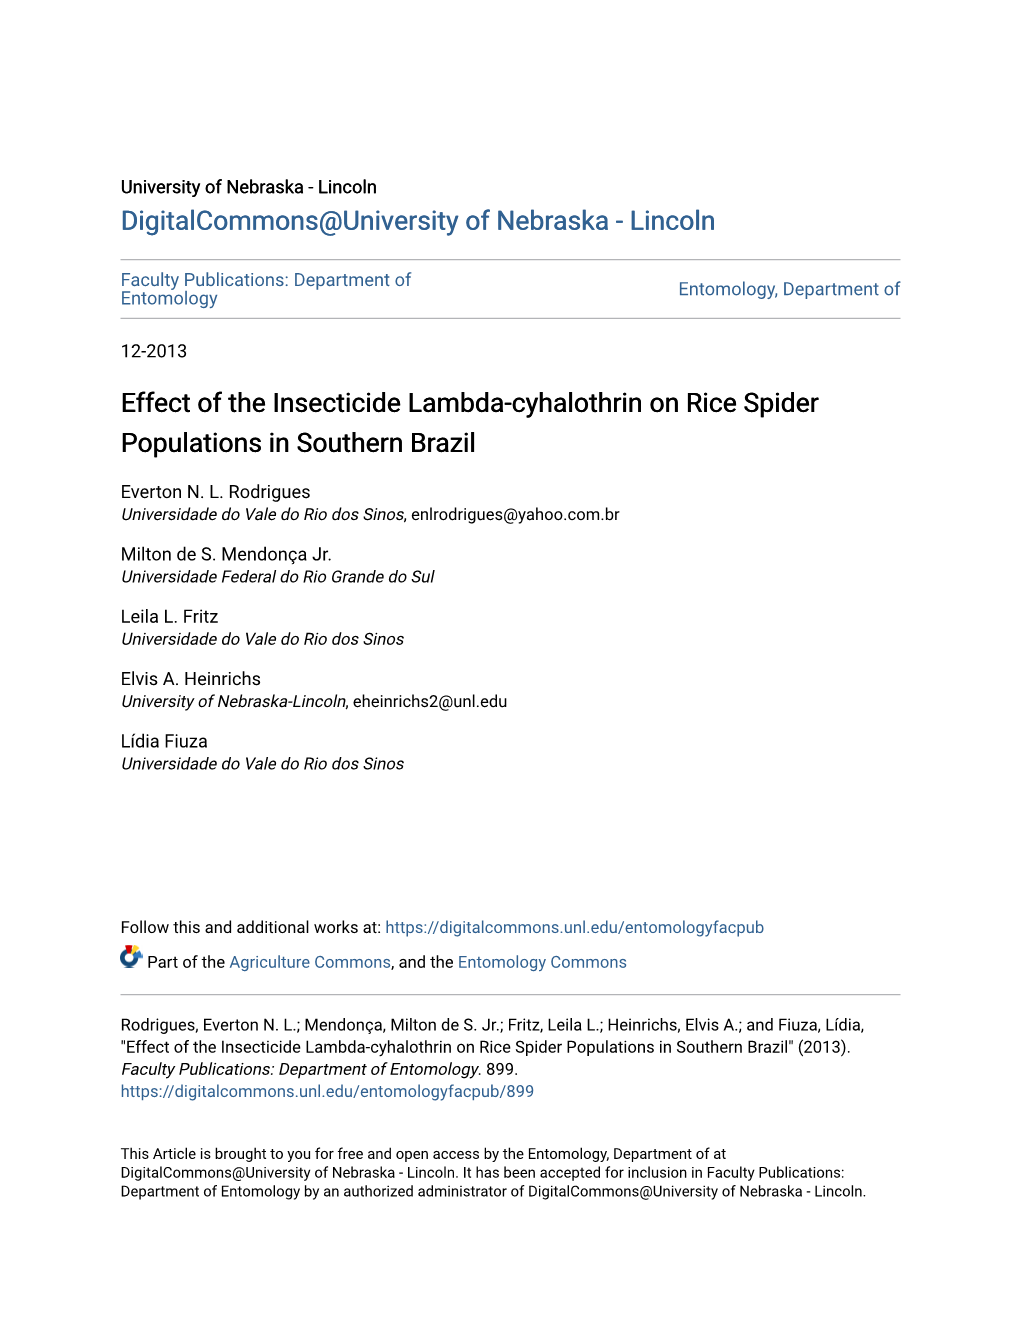 Effect of the Insecticide Lambda-Cyhalothrin on Rice Spider Populations in Southern Brazil